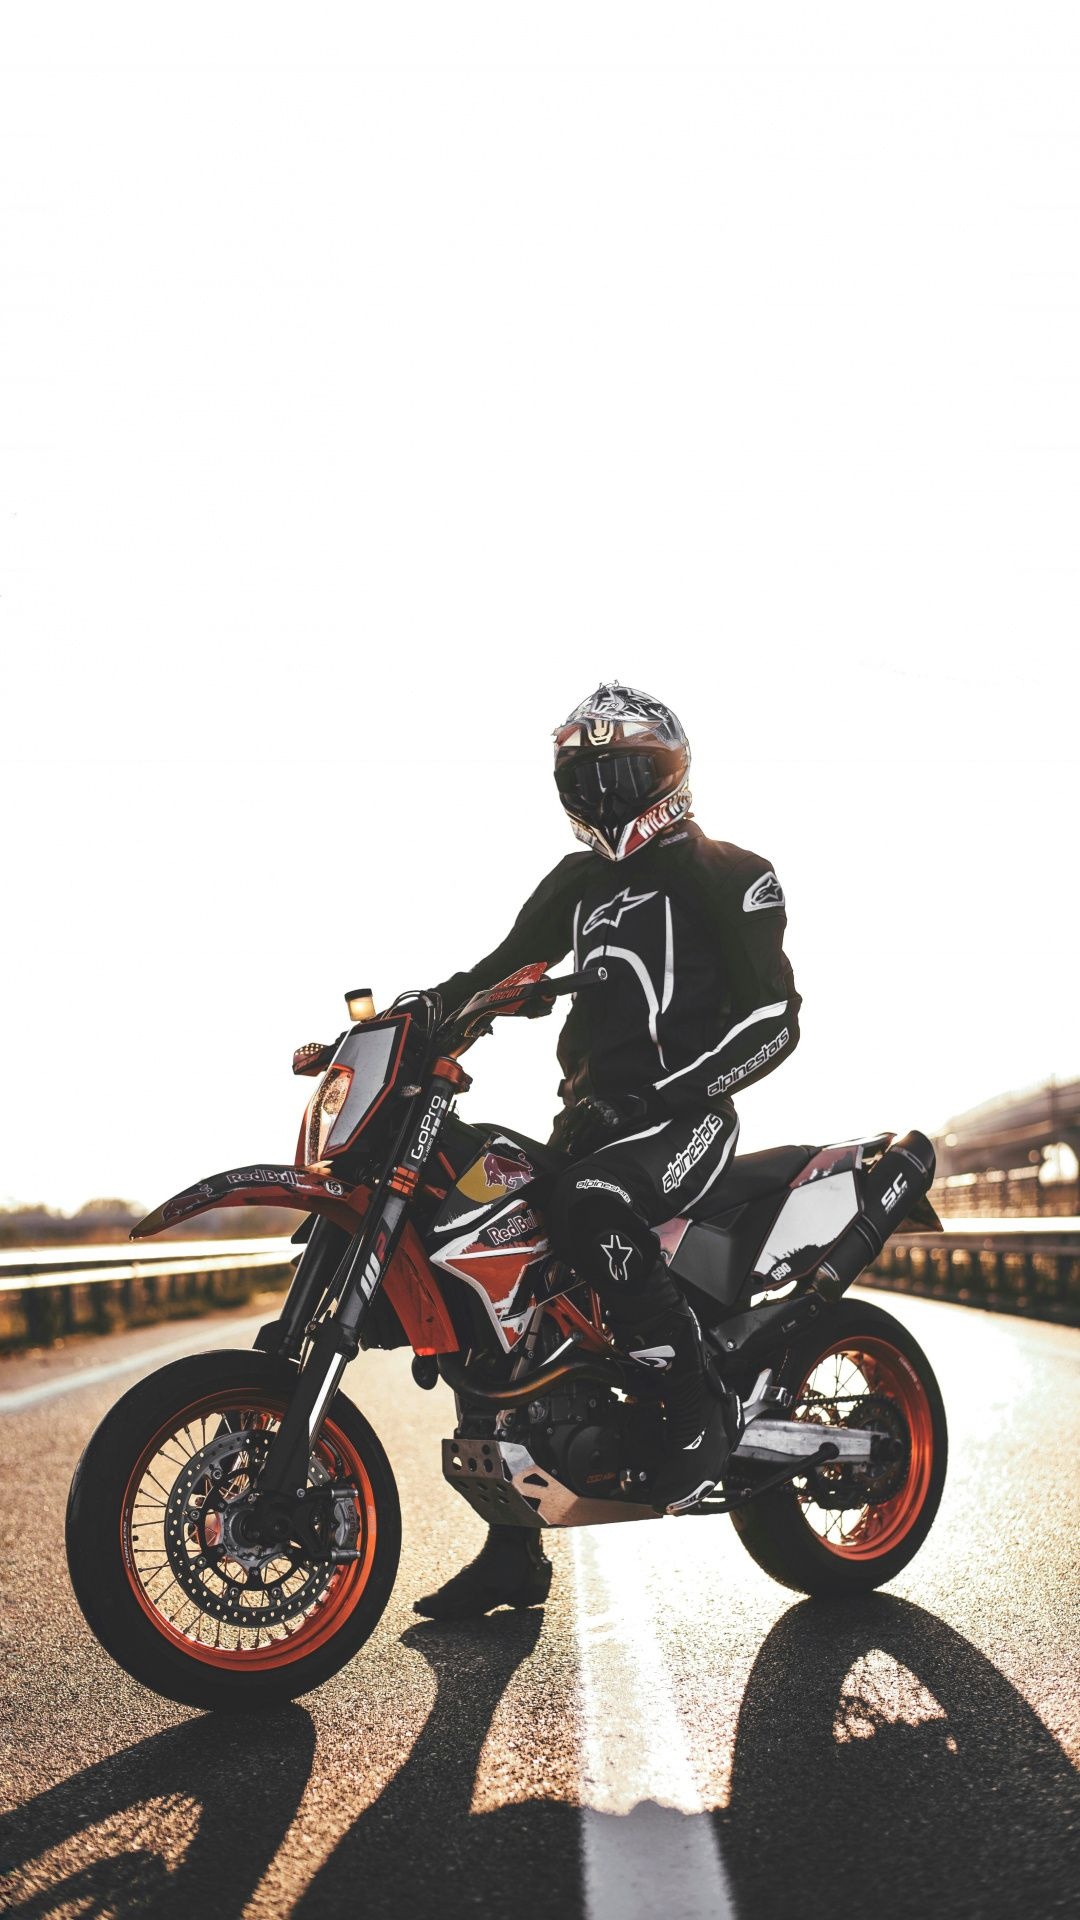 Supermoto: Motorcycle helmet, A mixture of street-style racing and motocross. 1080x1920 Full HD Wallpaper.